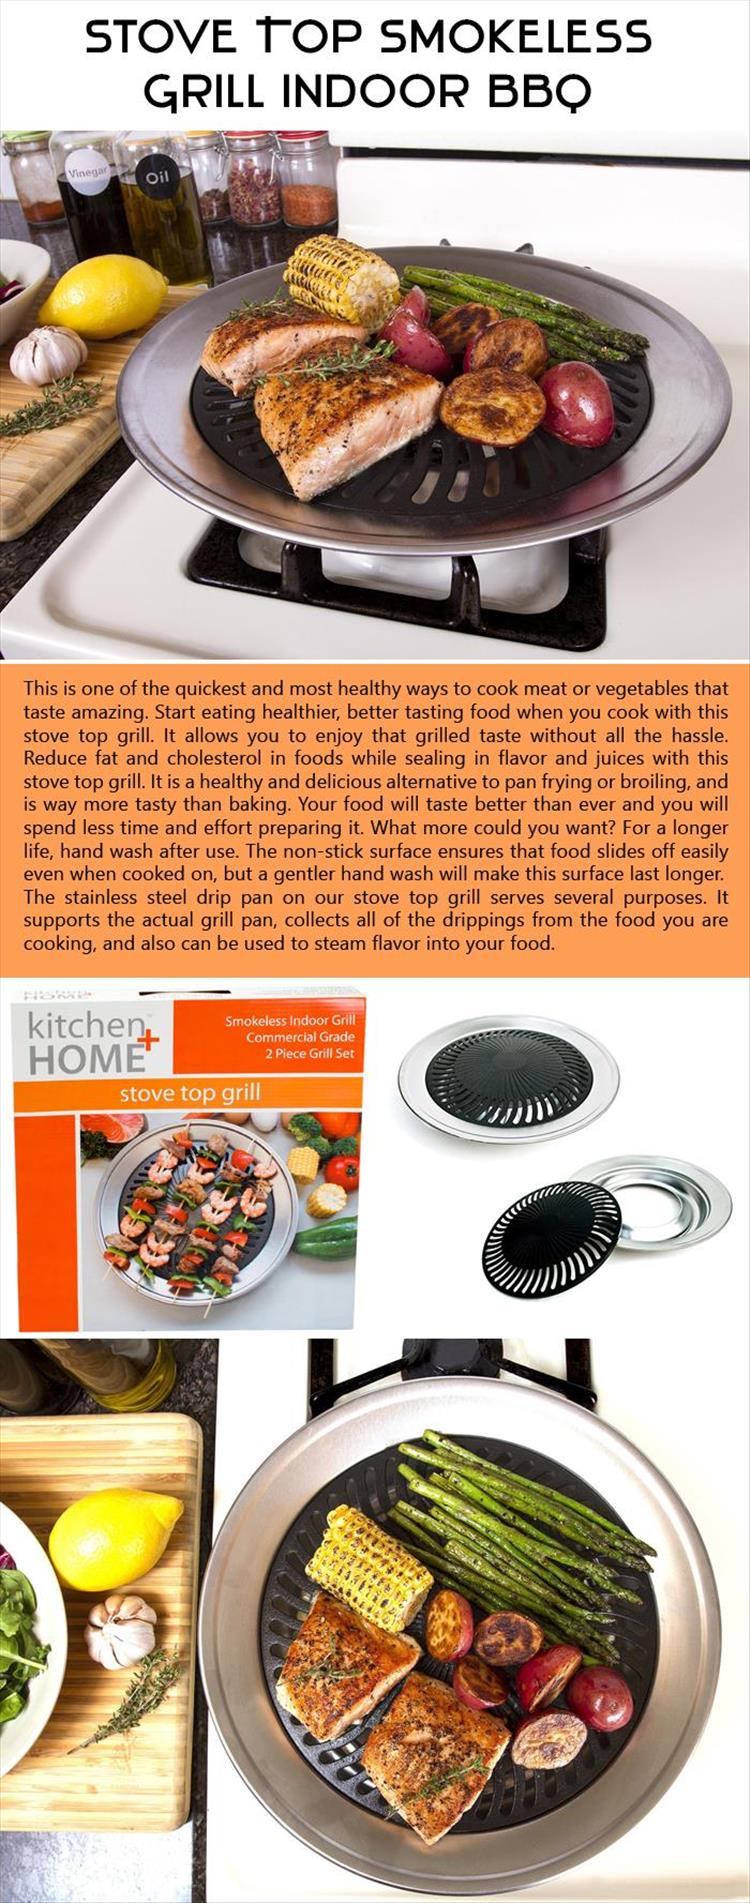 Stove Top Smokeless Grill Indoor BBQ